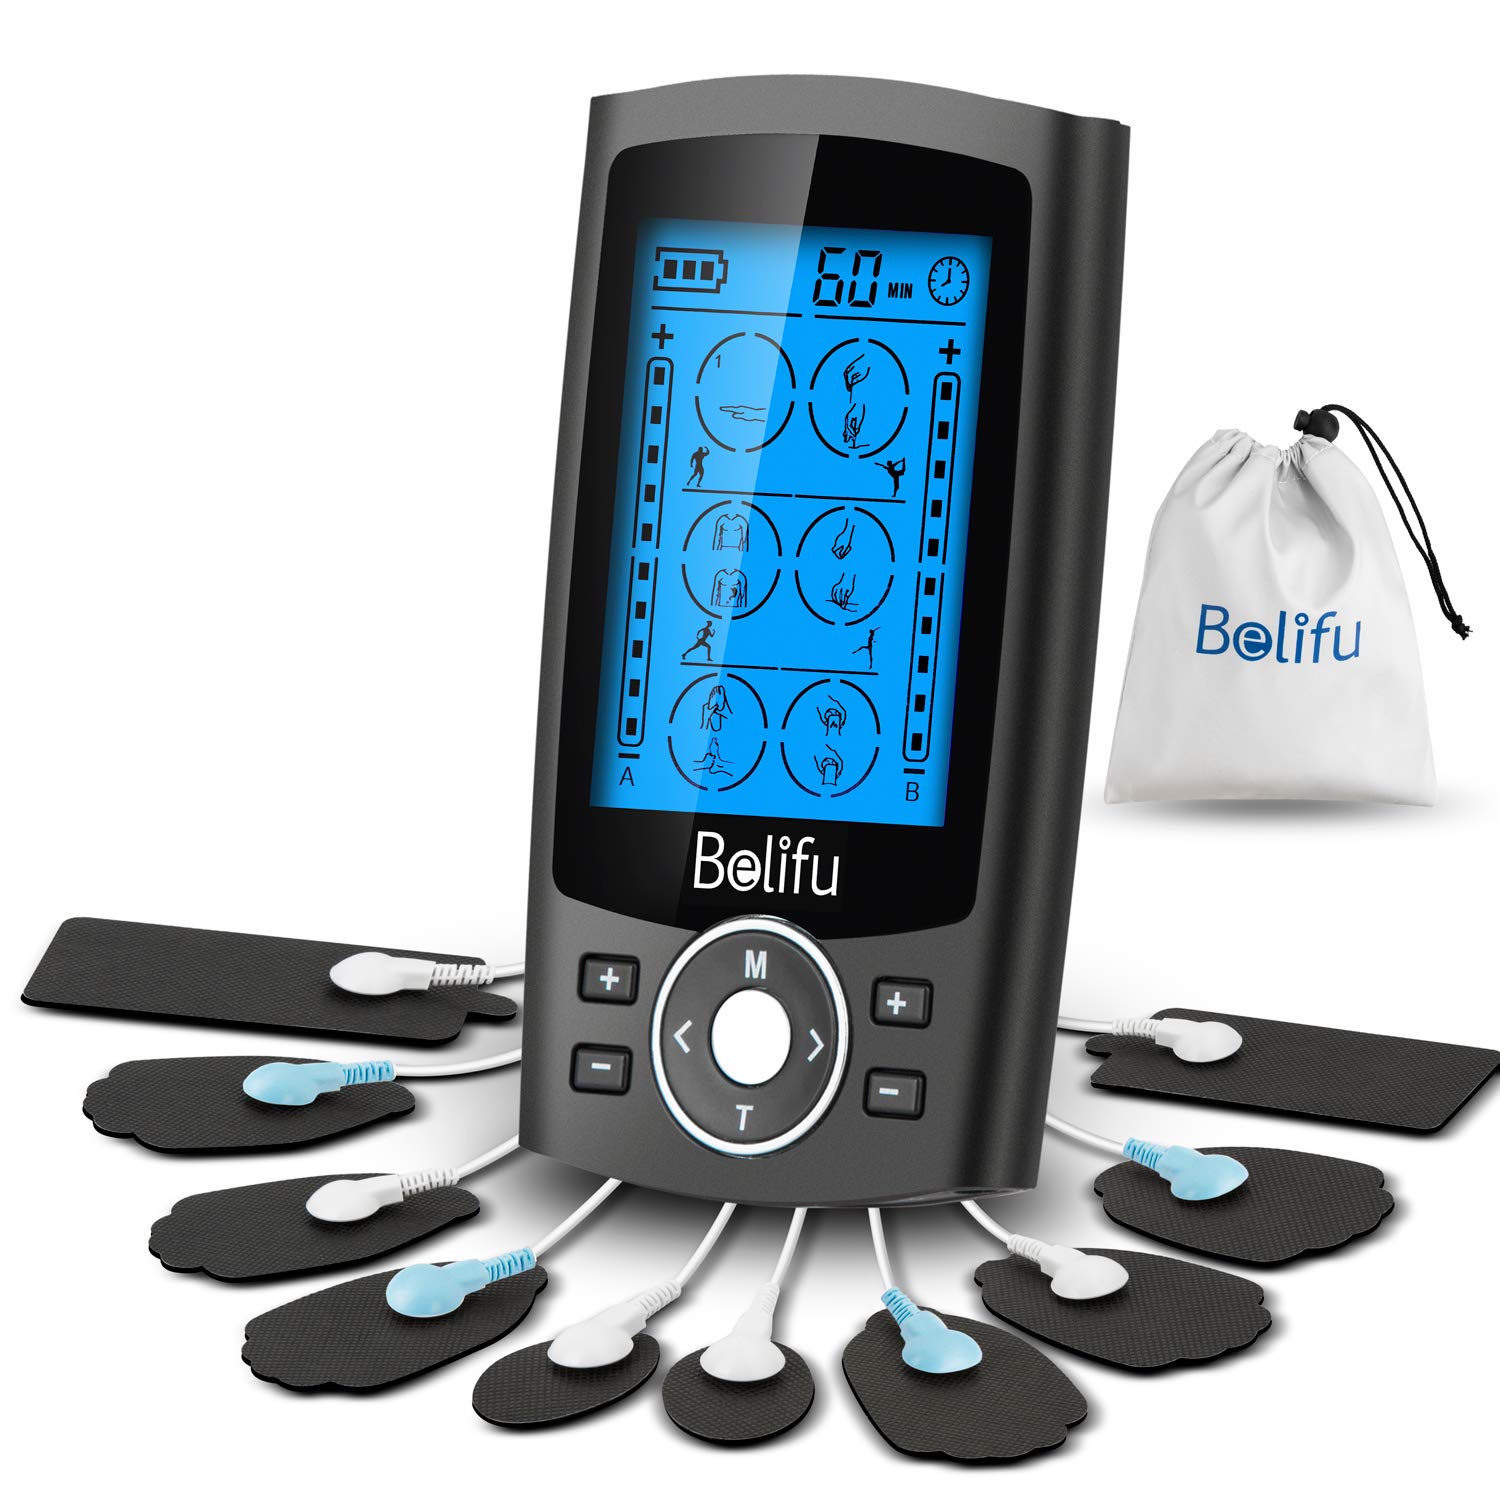 TENS unit to fight scoliosis pain.